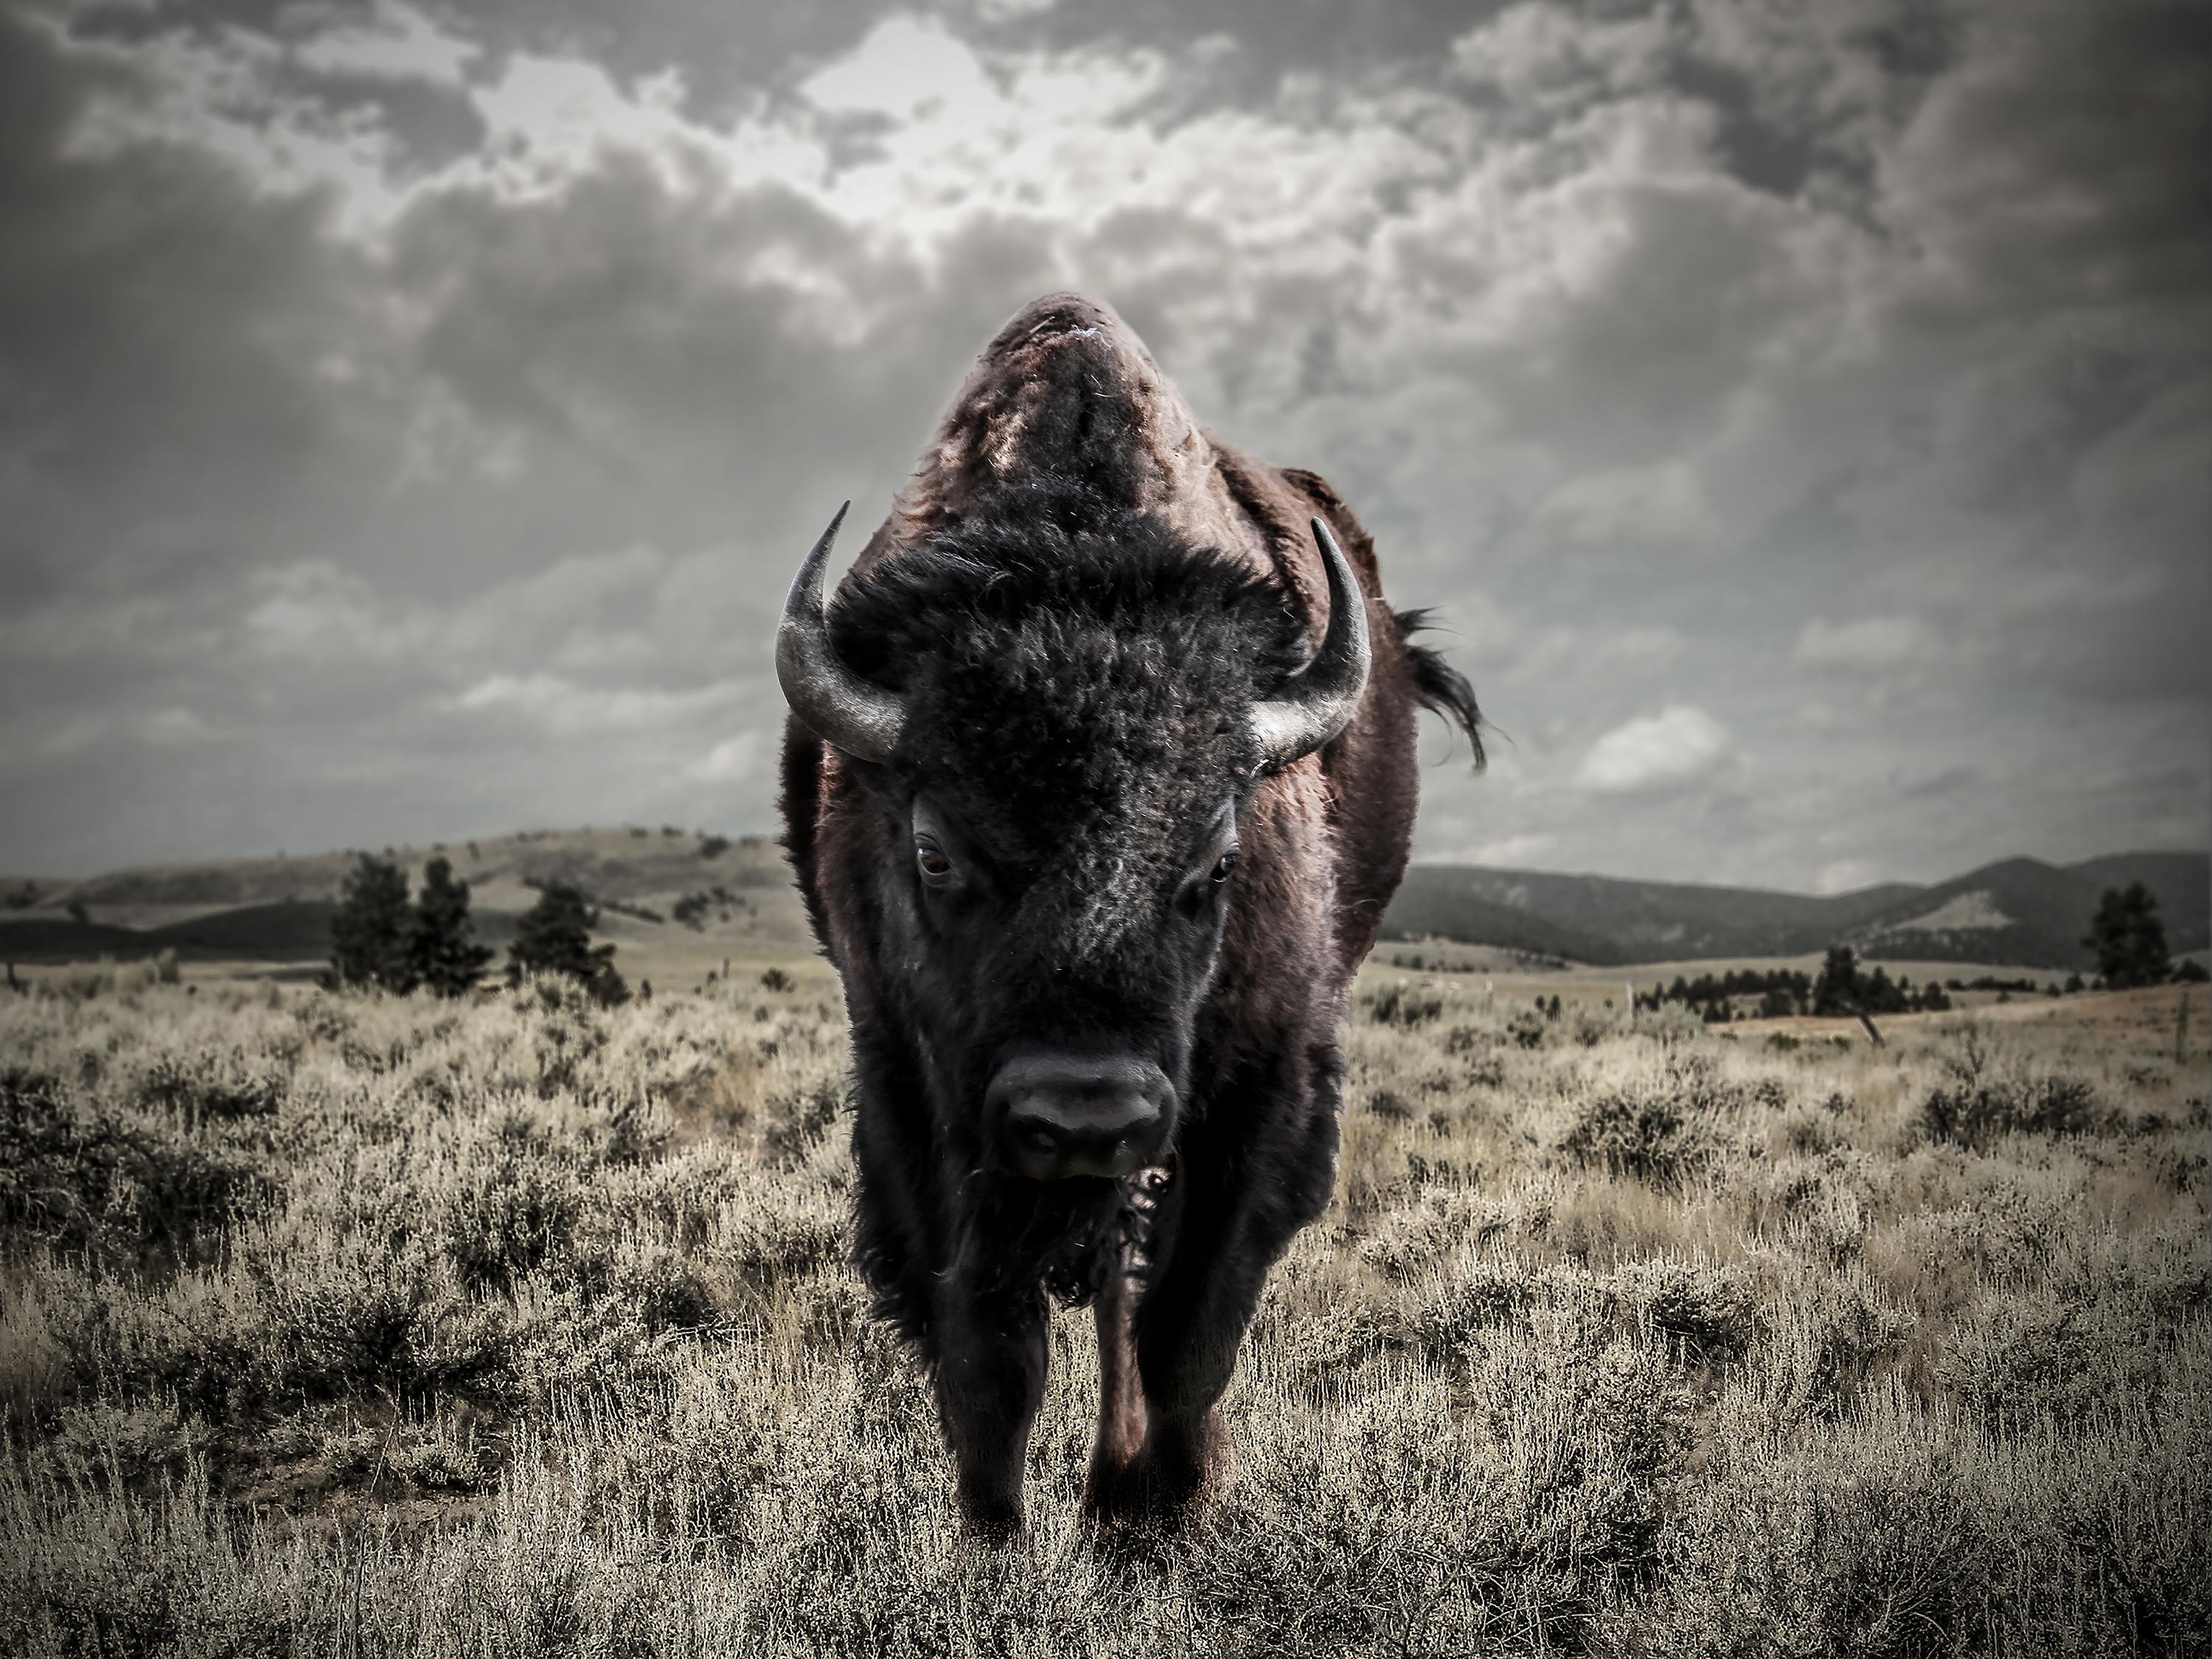 Shane Russeck Black and White Photograph - "Bison" 36x48 - Black & White Photography, Buffalo, Bison 